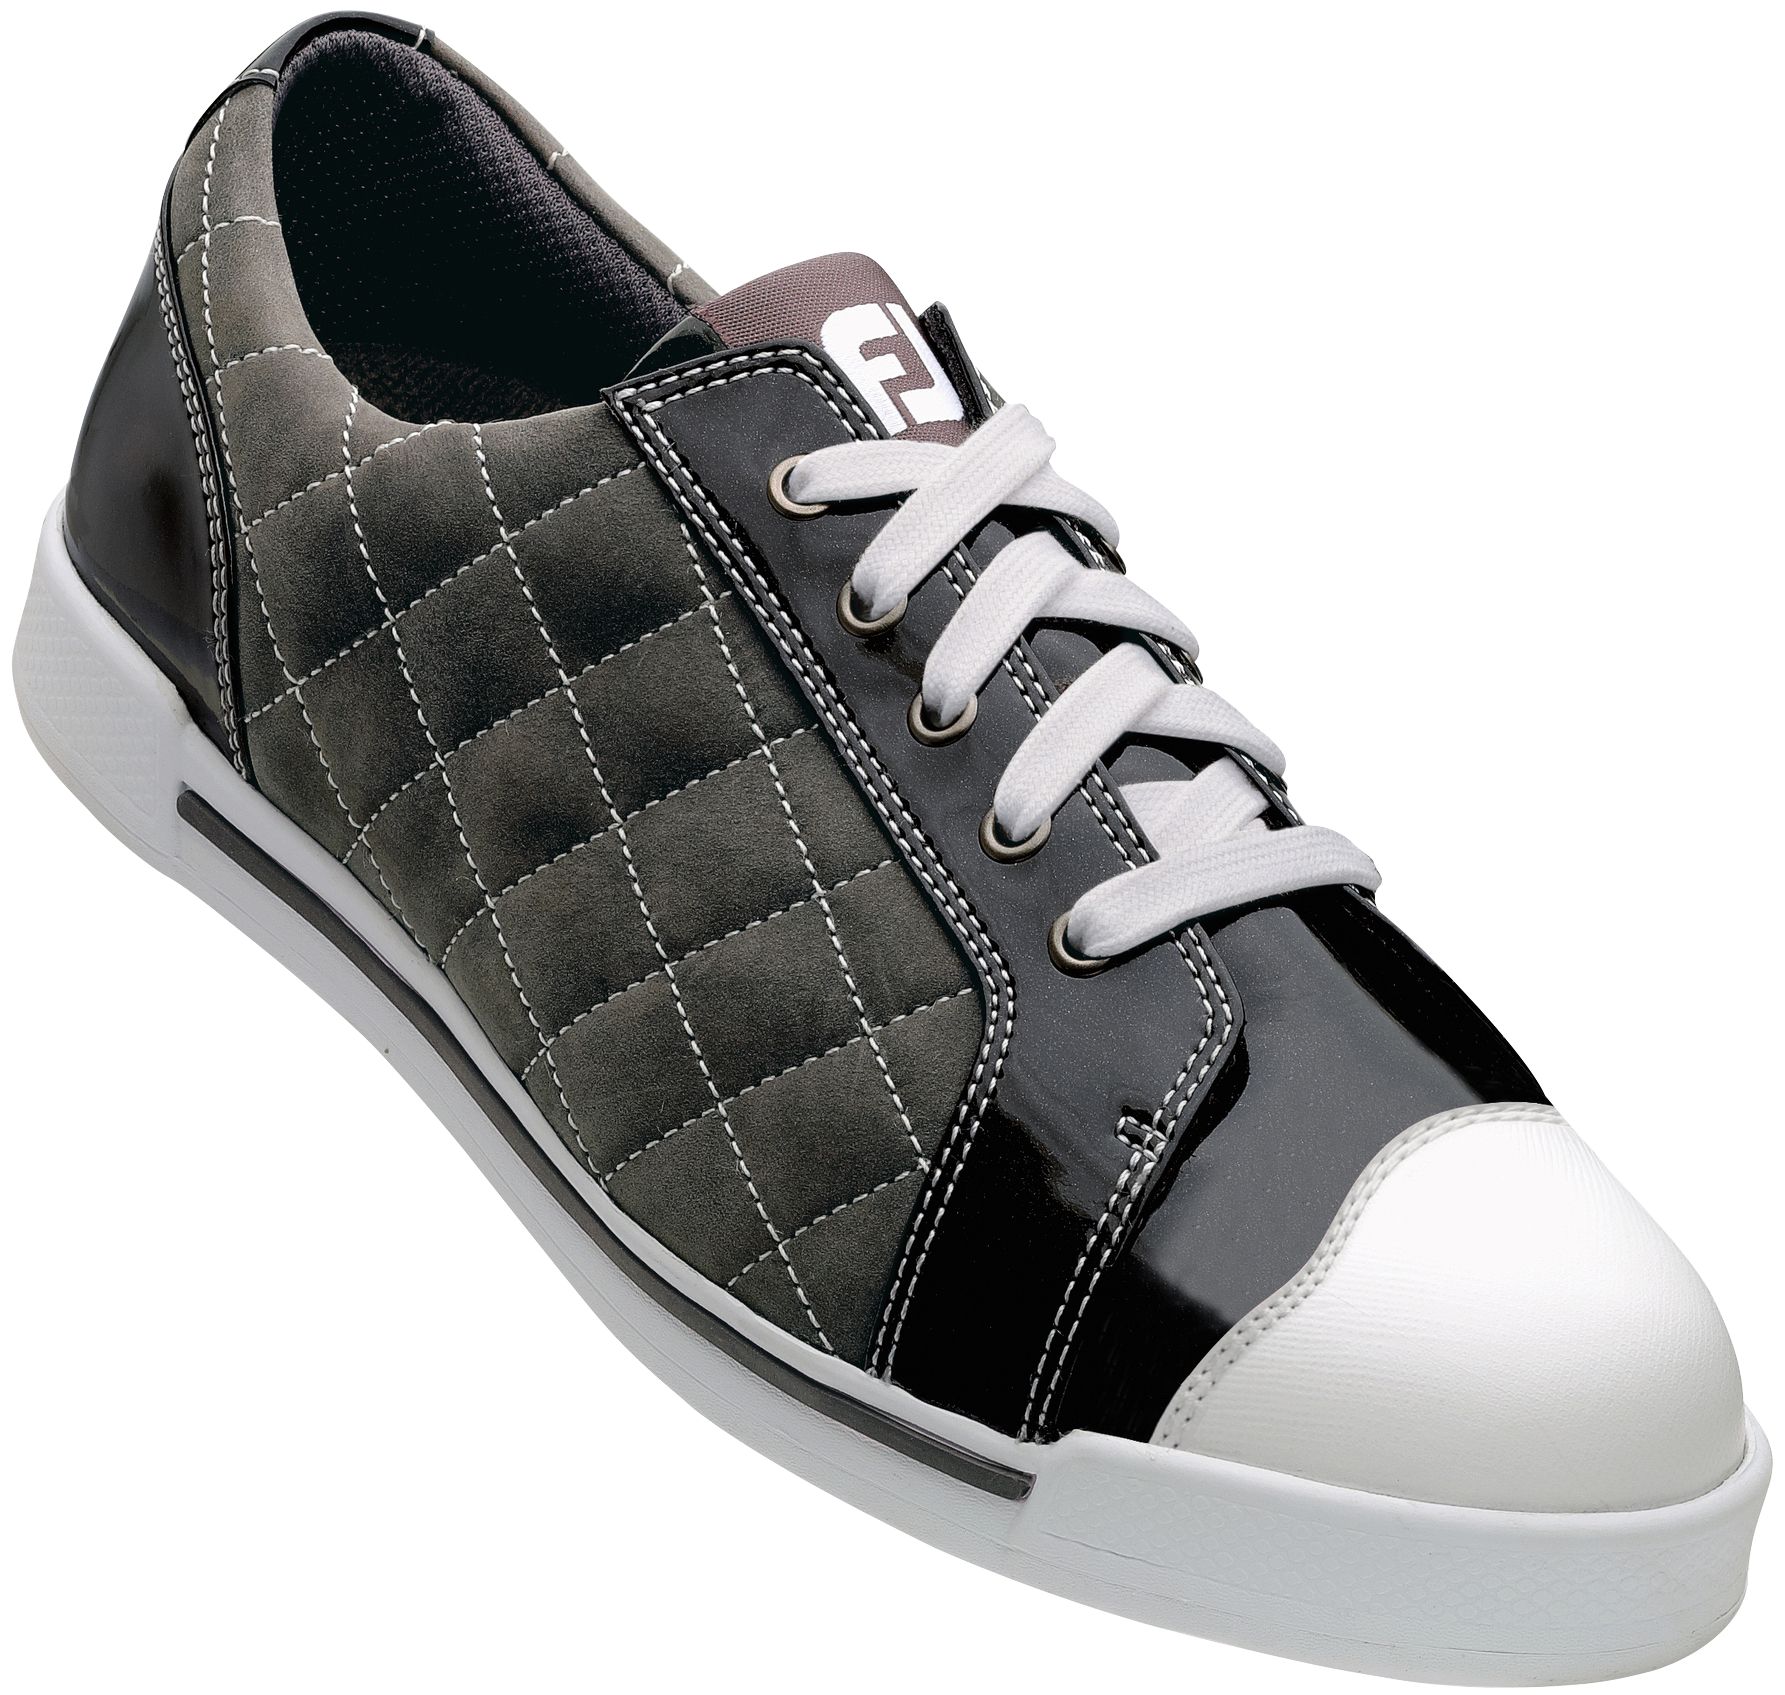 Footjoy Women’s Summer Series Golf Shoes Charcoal/white